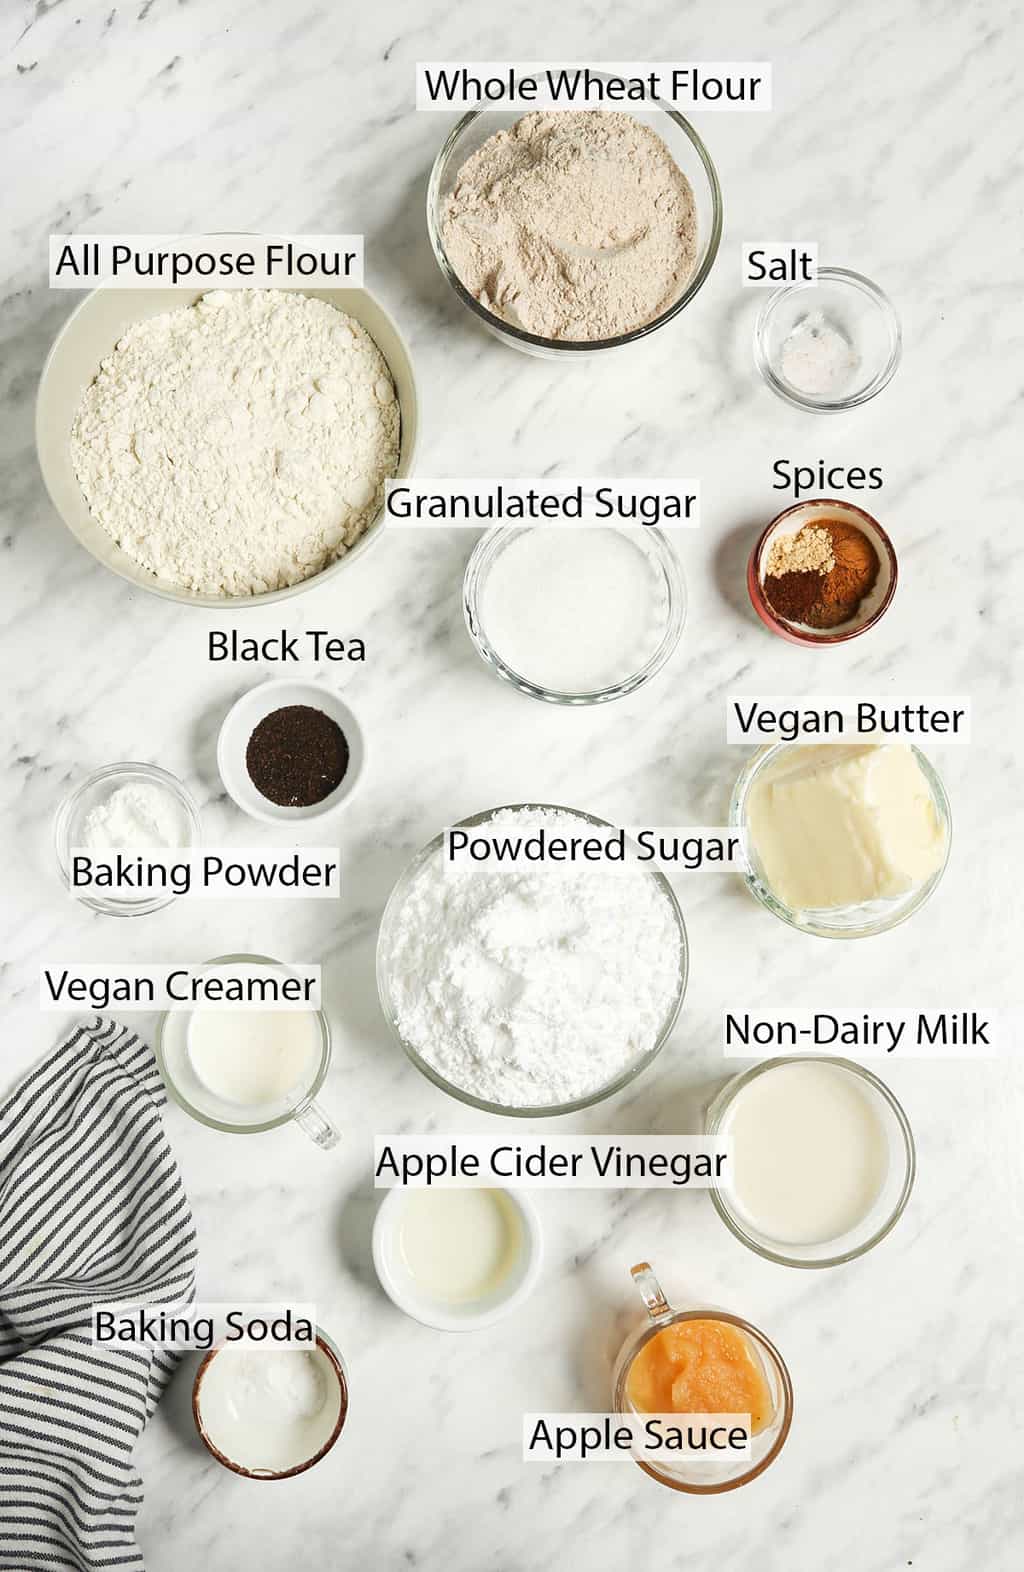 All the ingredients for vegan scones measured out and placed on a marble countertop. 